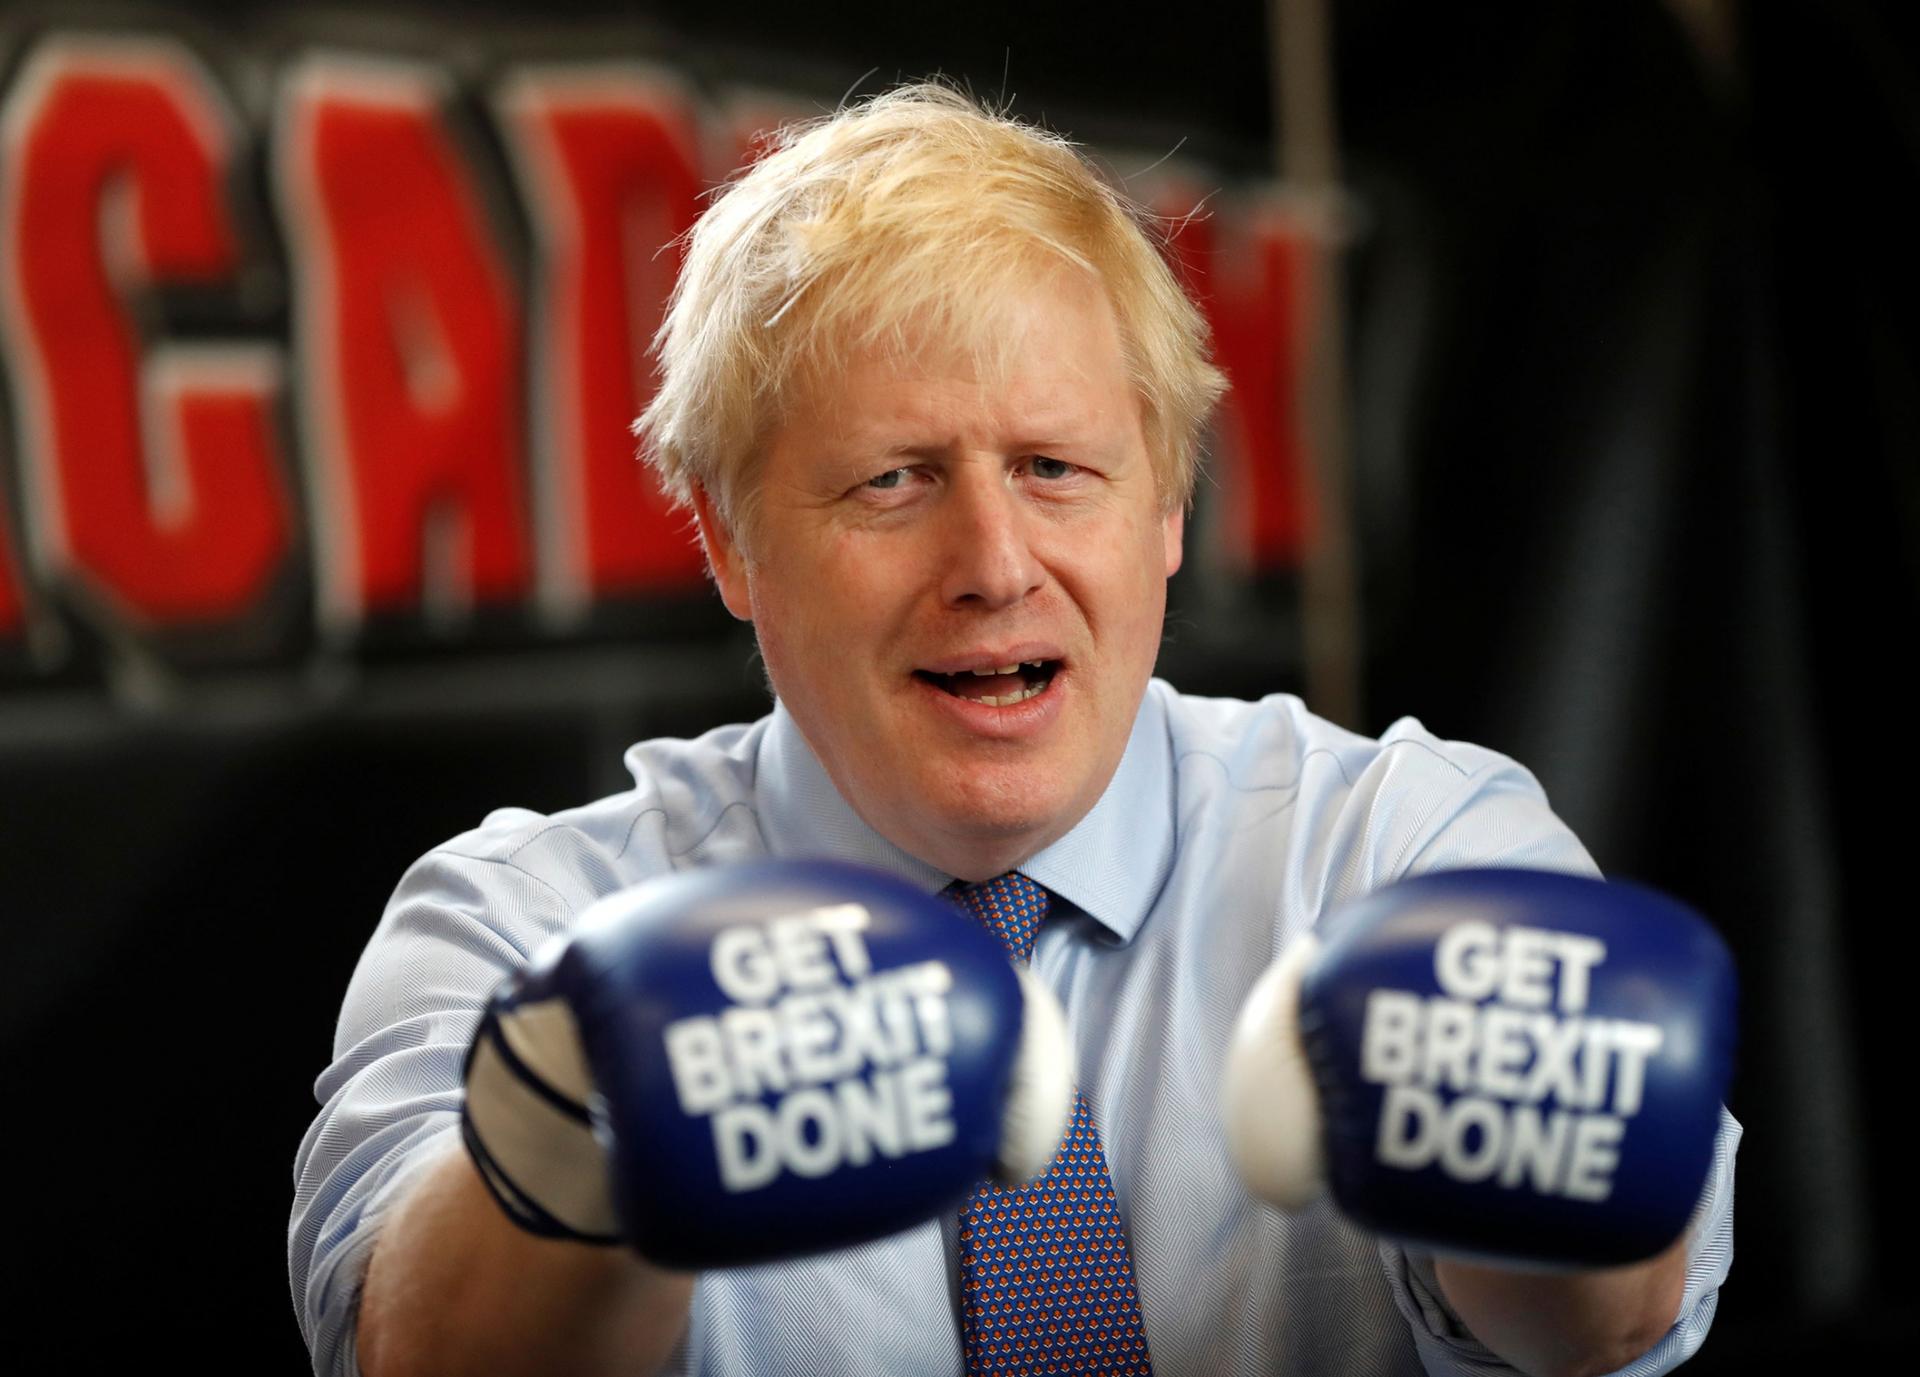 Britain's Prime Minister Boris Johnson is shown wearing blue boxing gloves with the words "Get Brexit Done" printed on them.